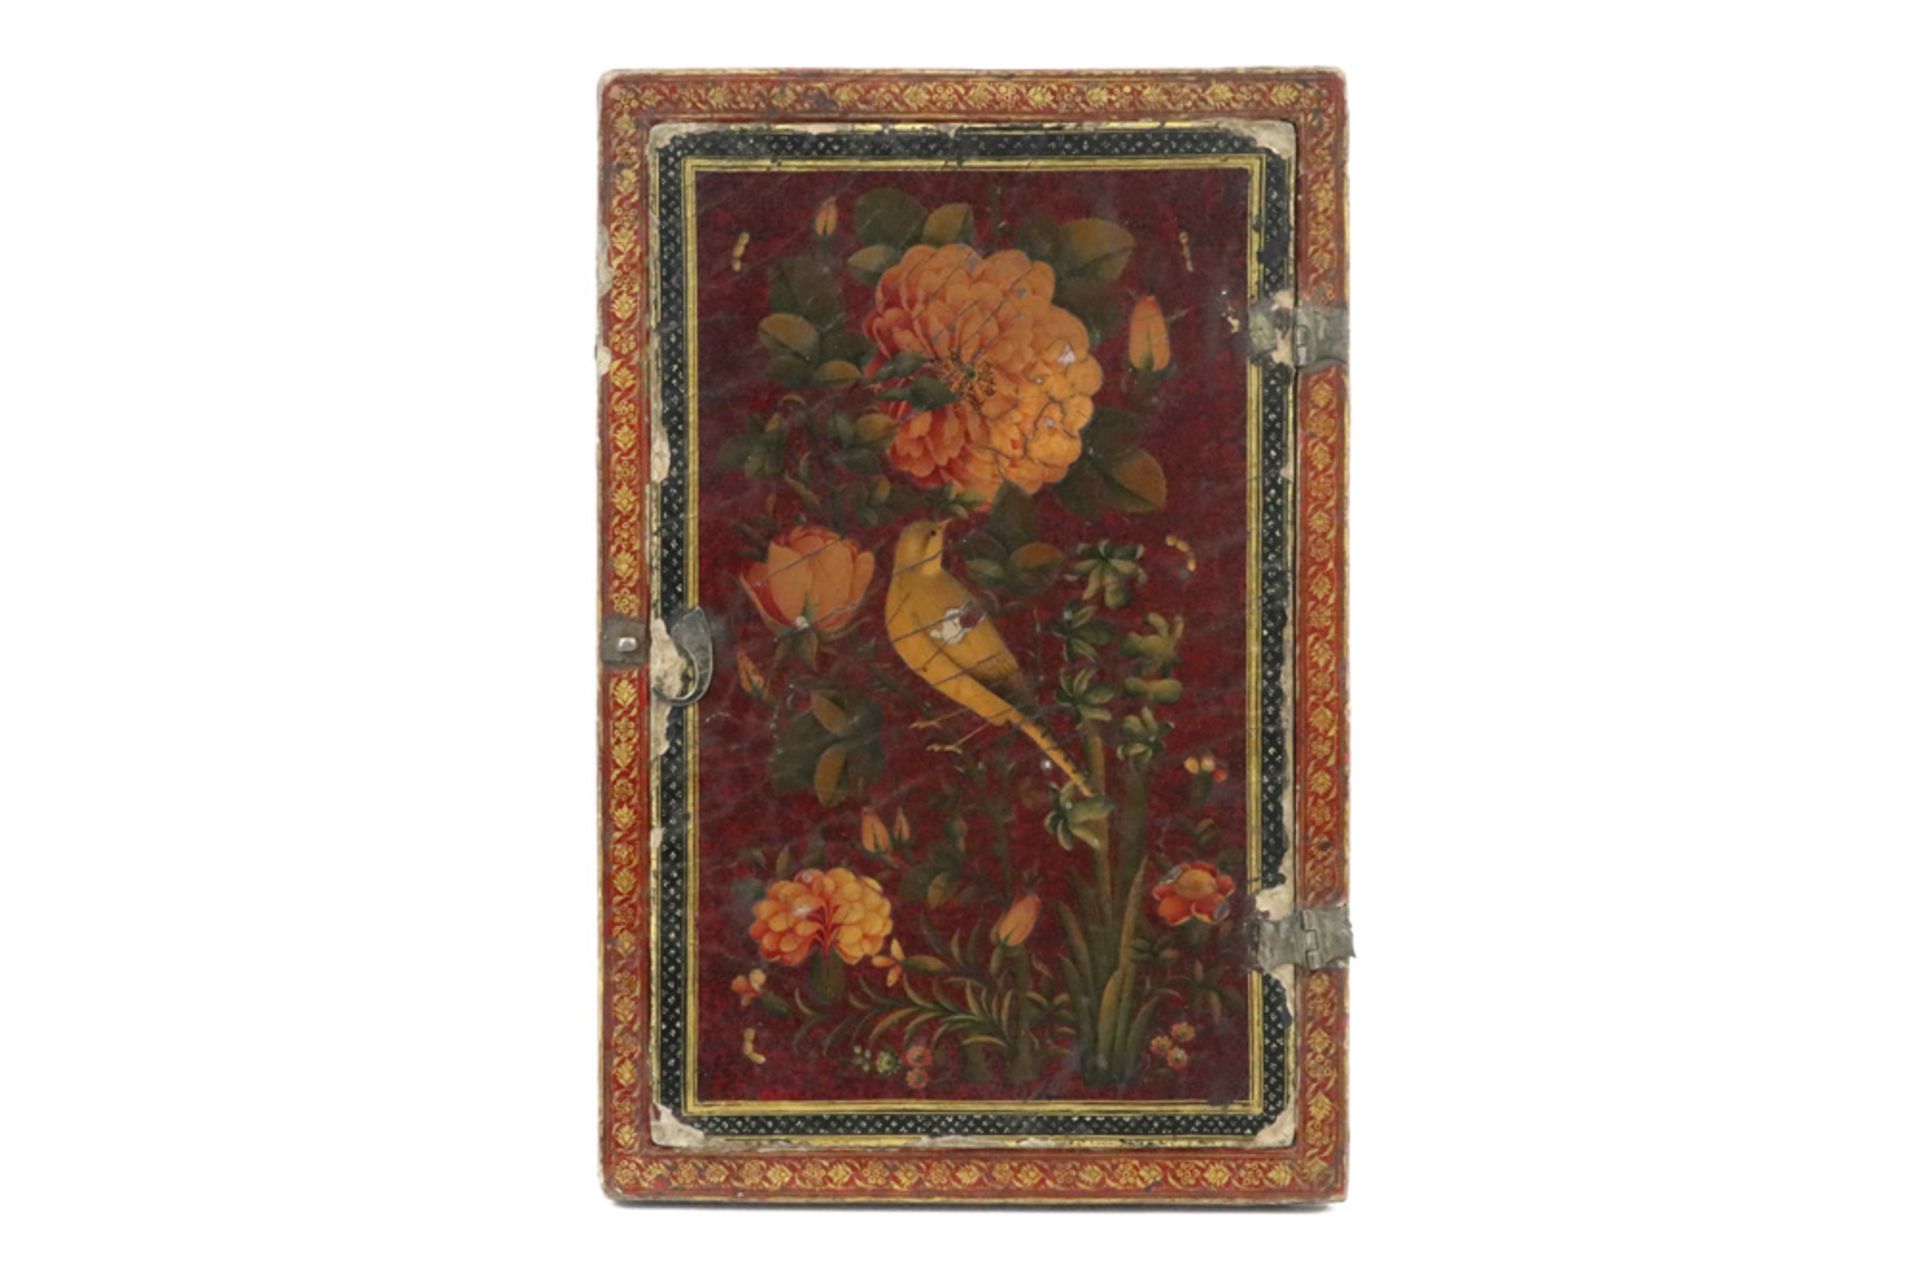 19th Cent. Persian Qajari case with a finely painted decor with birds and flowers and with a door